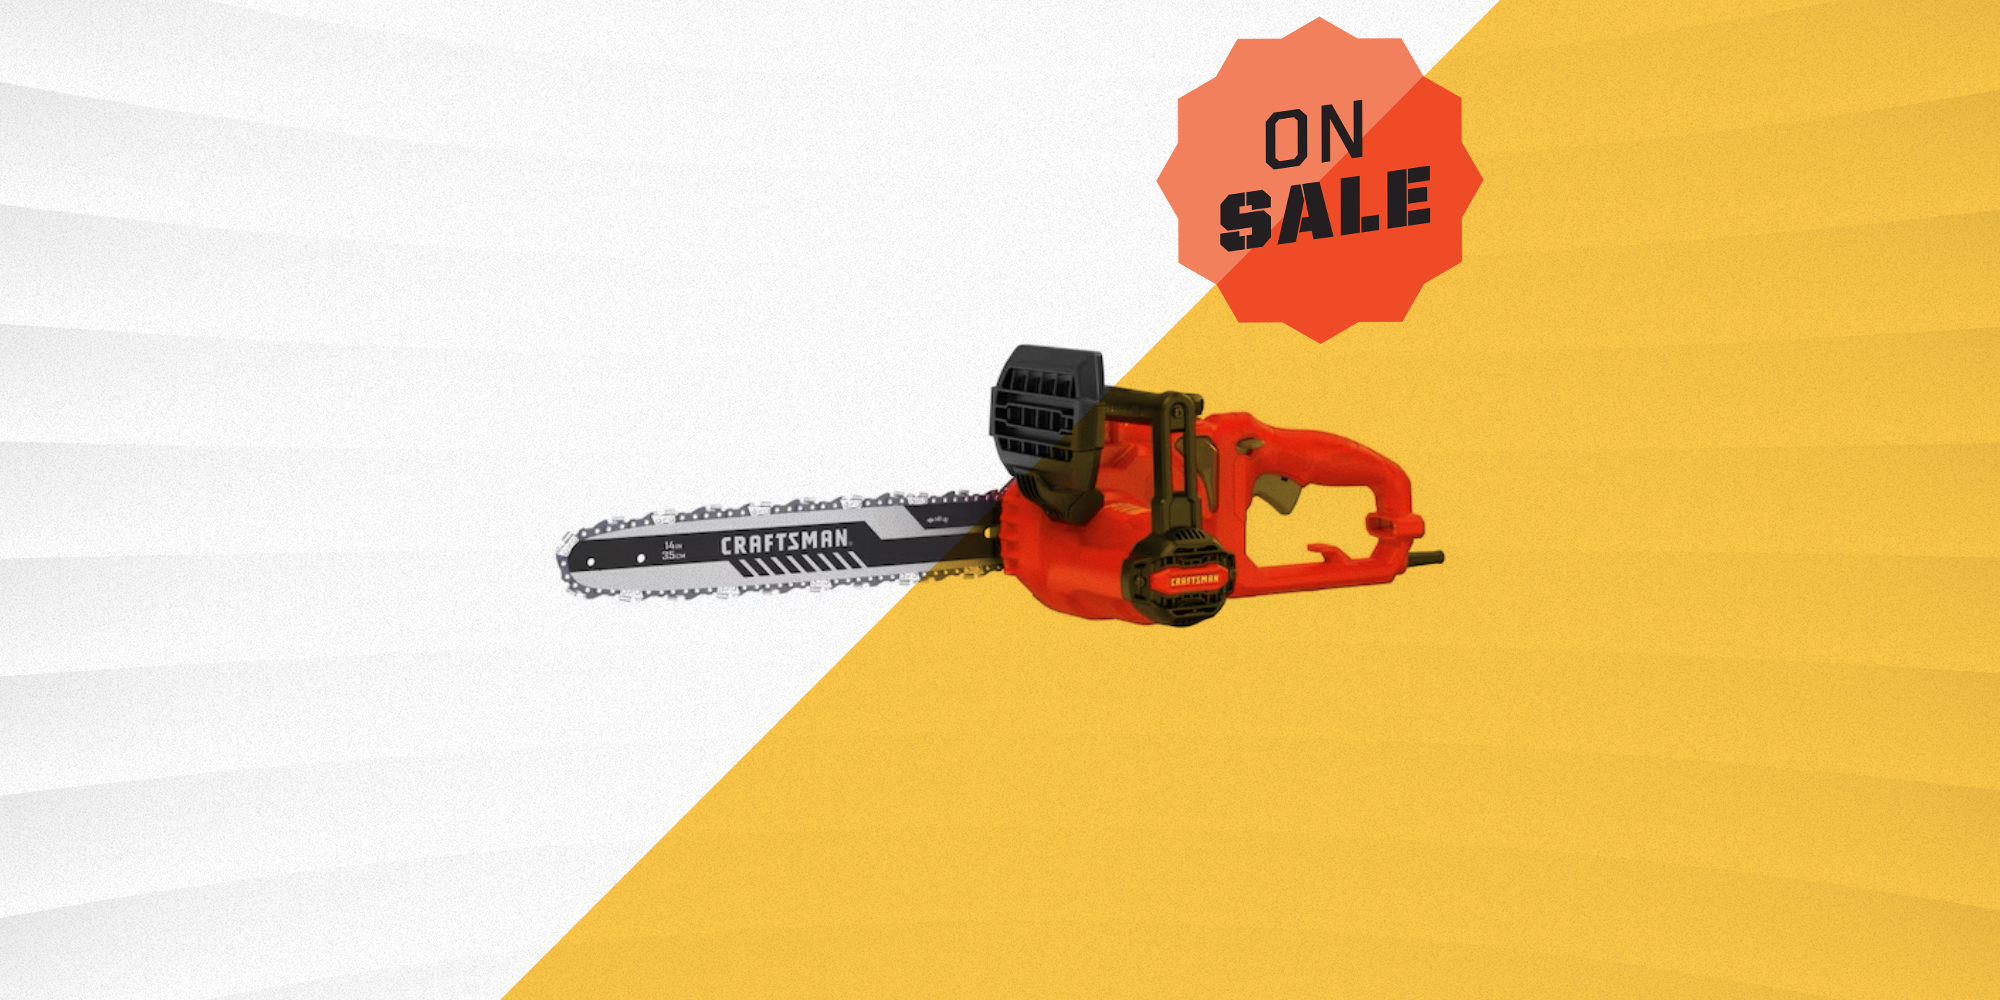 https://hips.hearstapps.com/hmg-prod/images/pop-craftsman-corded-electric-chainsaws-on-sale-lowes-65402afc5b132.png